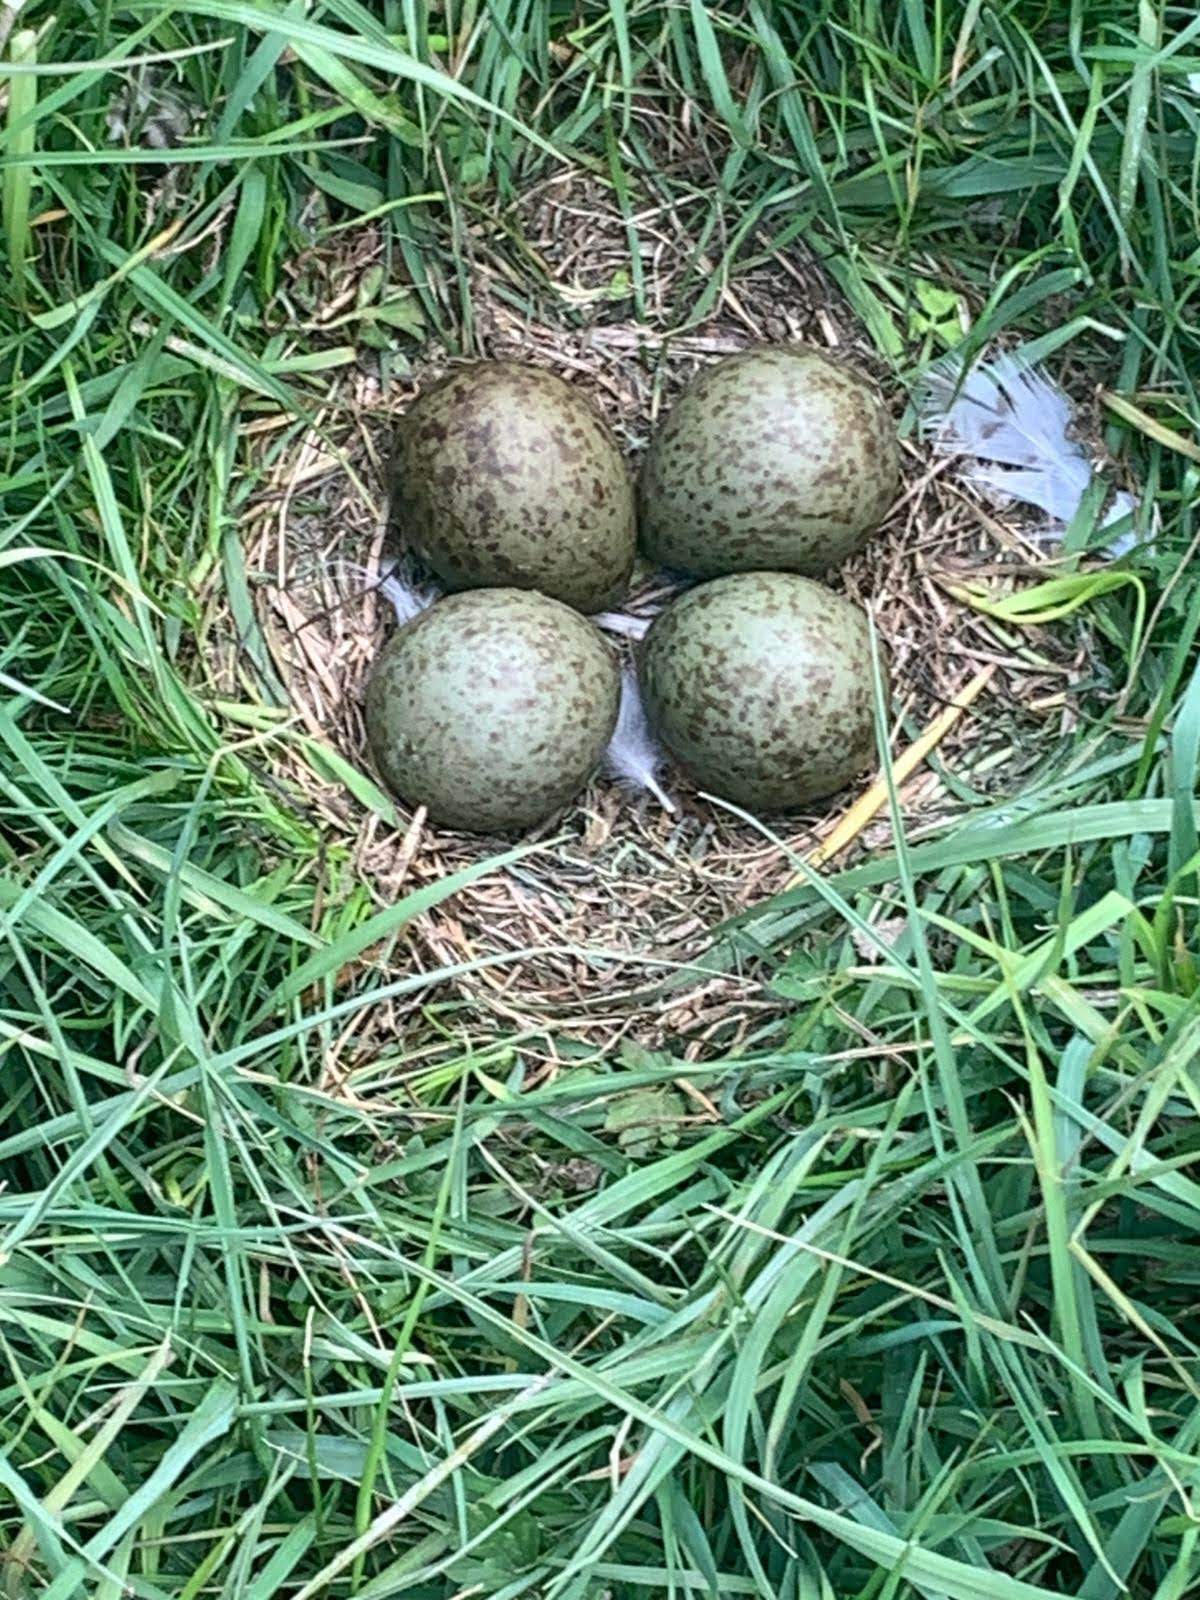 Four brown curlew eggs in a nest, surrounded by long grass.